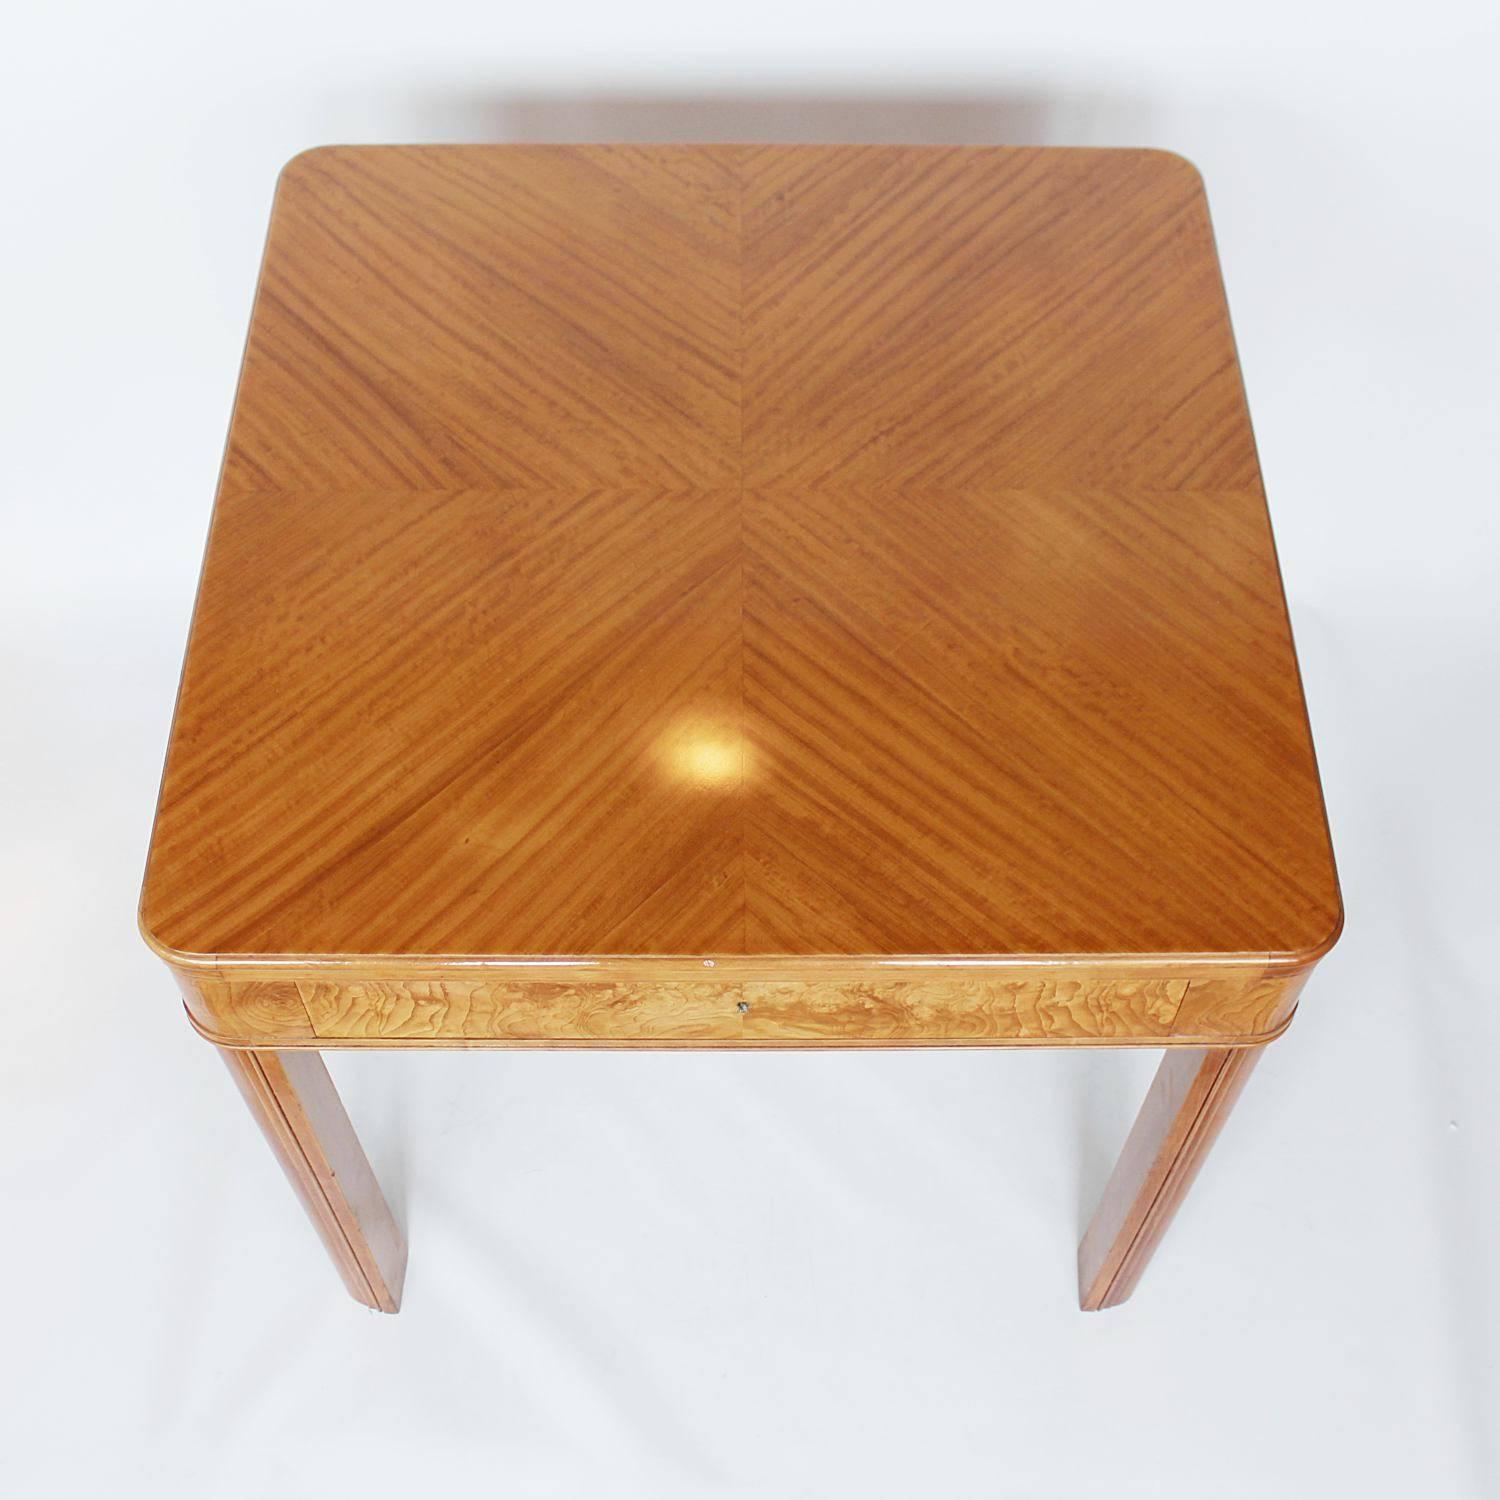 English Art Deco Table with Drawer